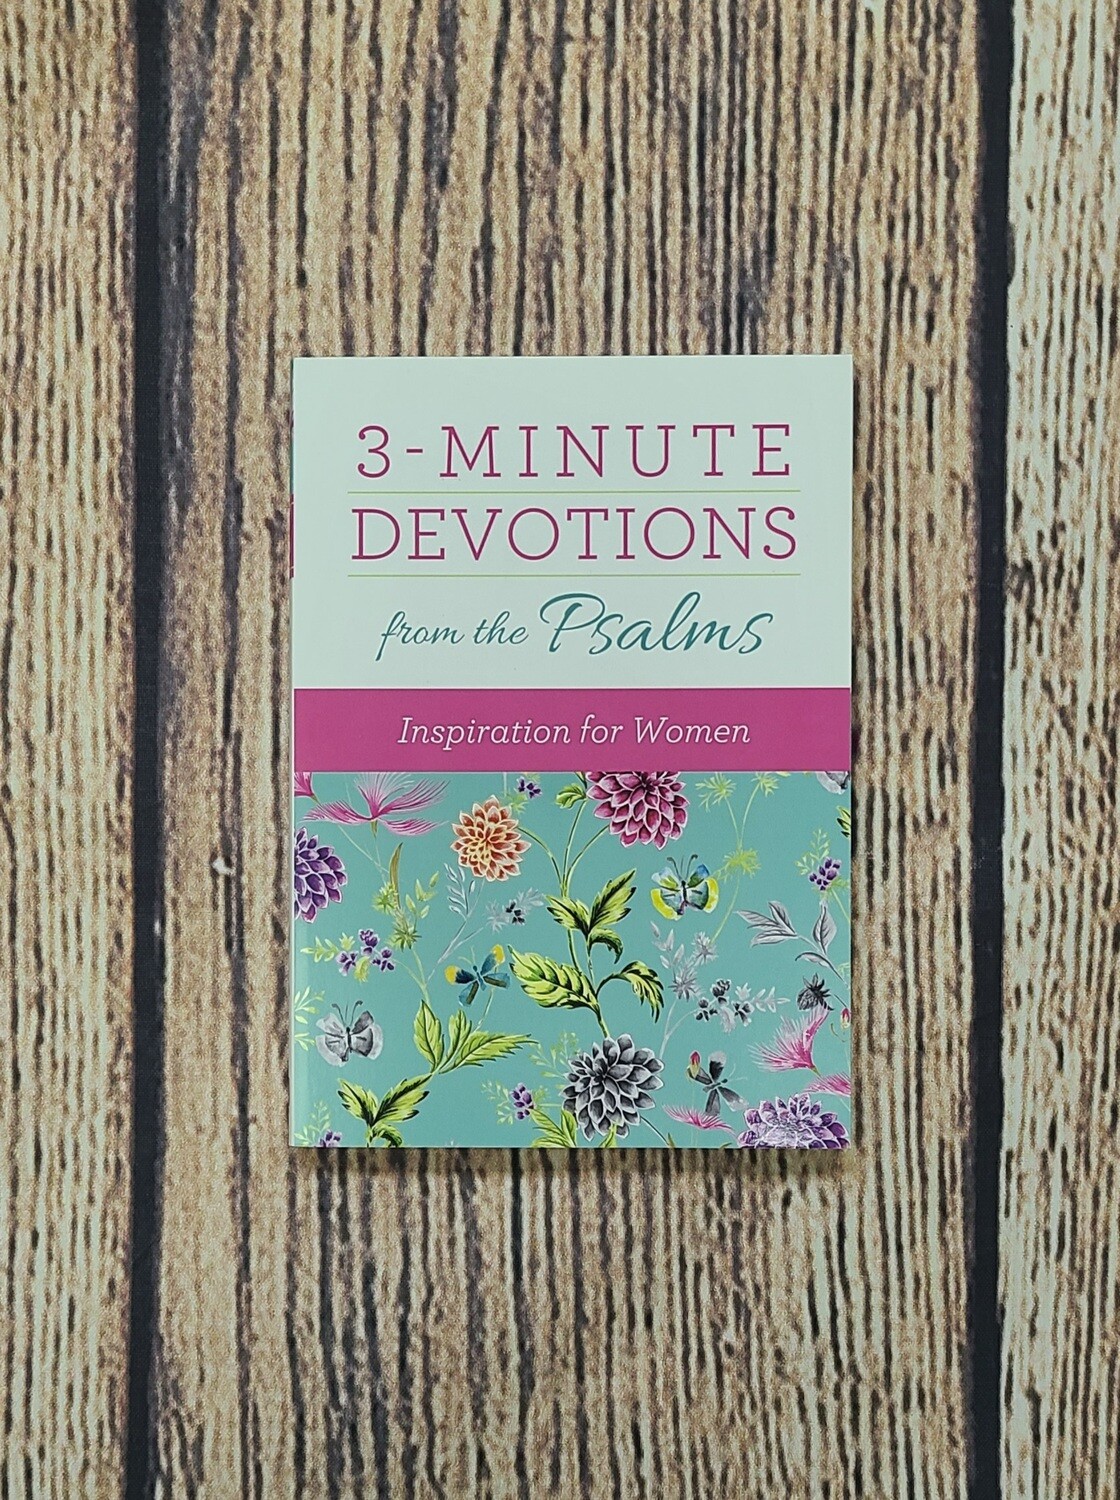 3-Minute Devotions from the Psalms: Inspiration for Women by Vicki J. Kuyper and MariLee Parrish